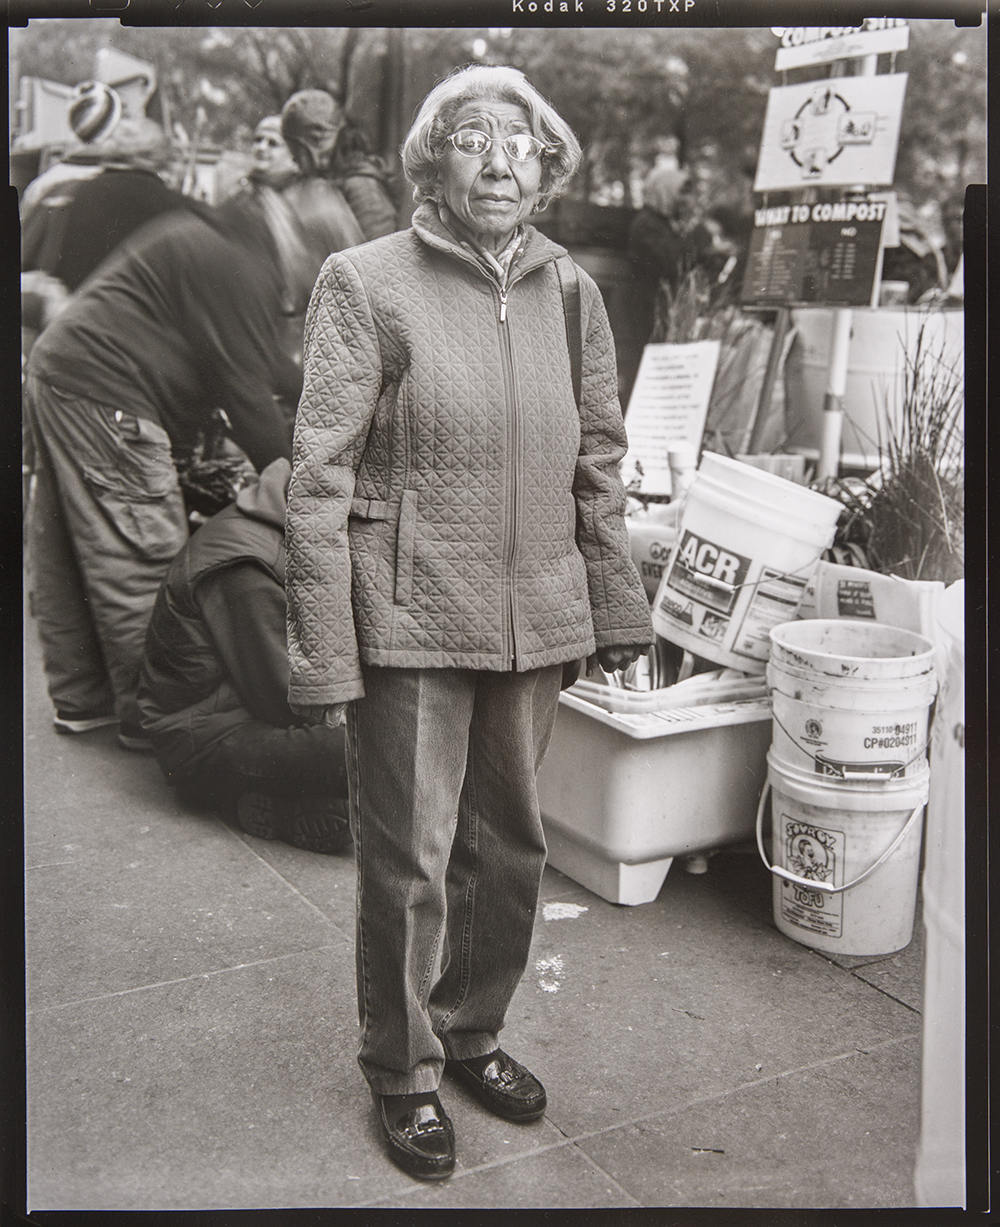 Photograph of an elderly Black woman in a quilted jacket standing outside on a busy street in Manhattan during the Occupy Wall Street protest